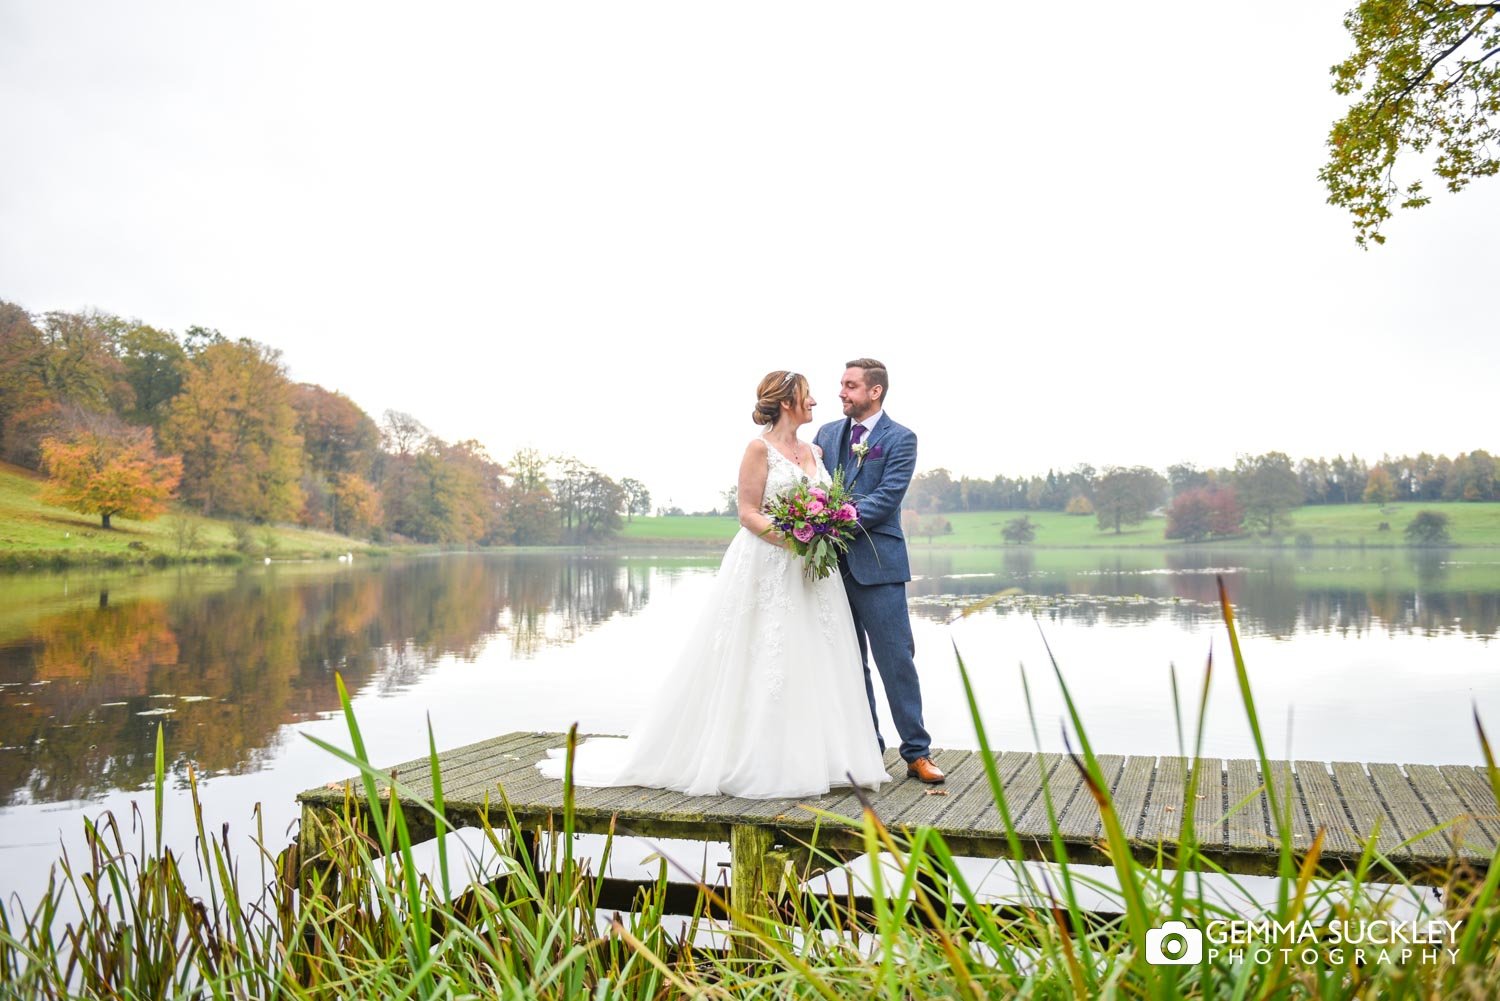 the bride and groom on the jetty at coniston hotel lake in the autumn